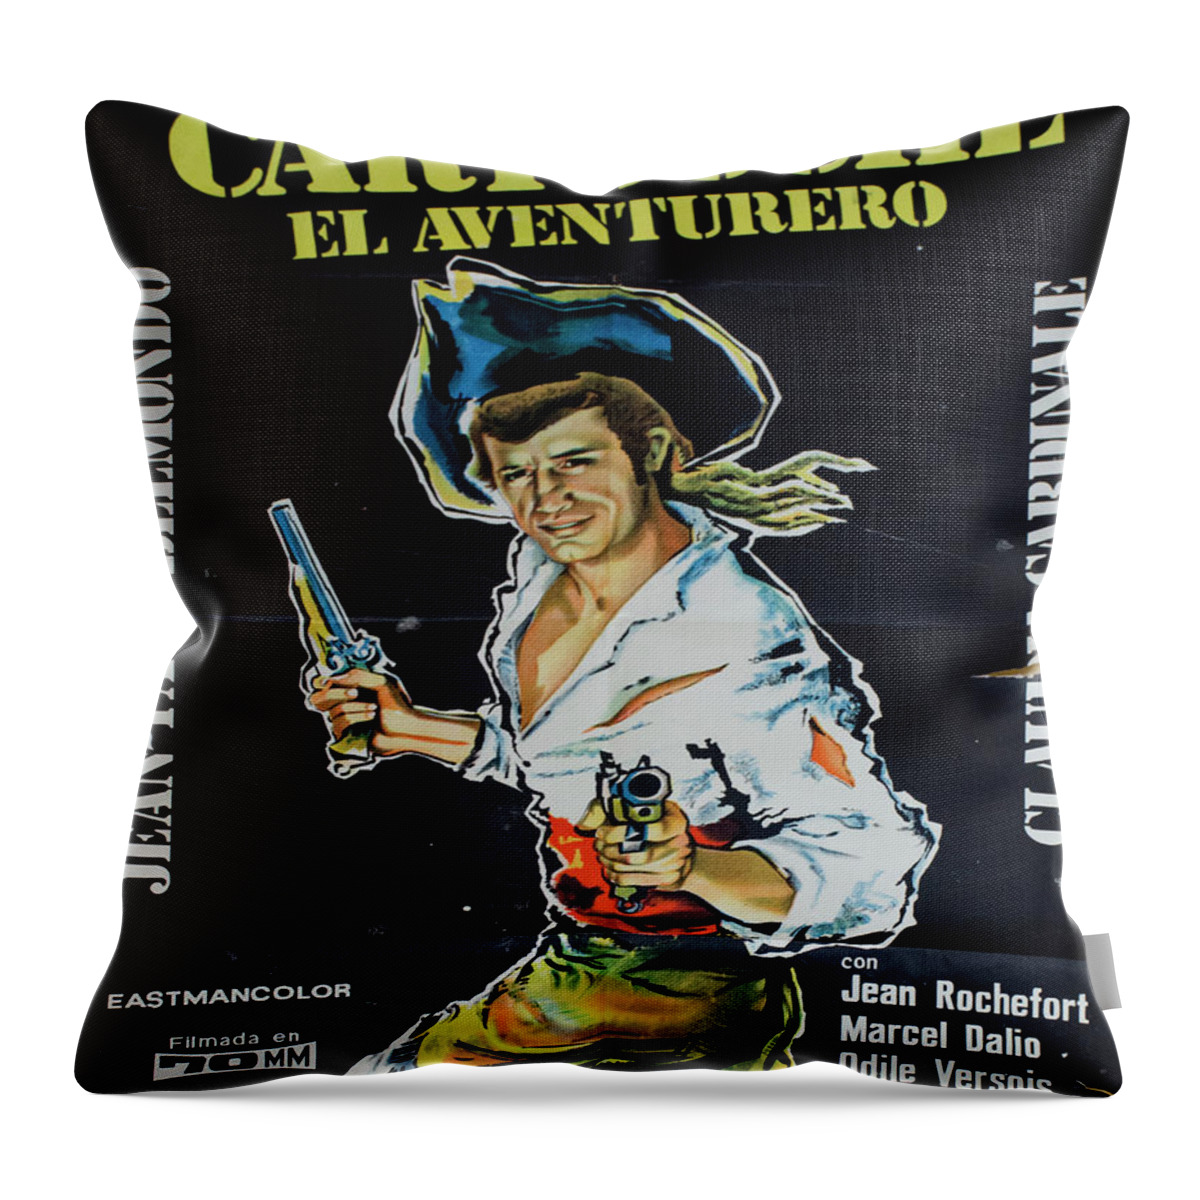 Cartouche El Aventurero Throw Pillow featuring the photograph Vintage Movie Poster 3 by Bob Christopher